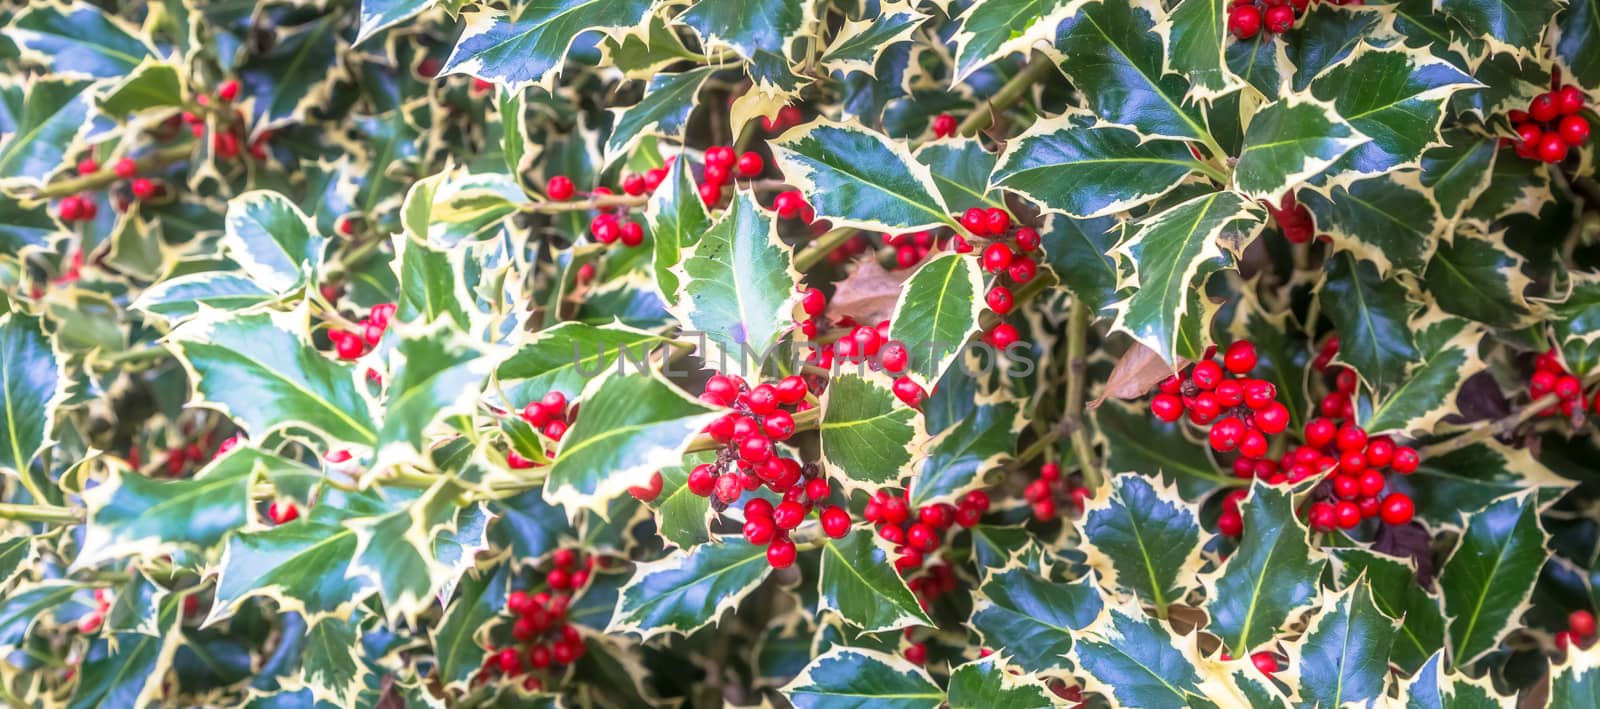 Holly barries background. Traditional symbol of Christmas and New Year season.